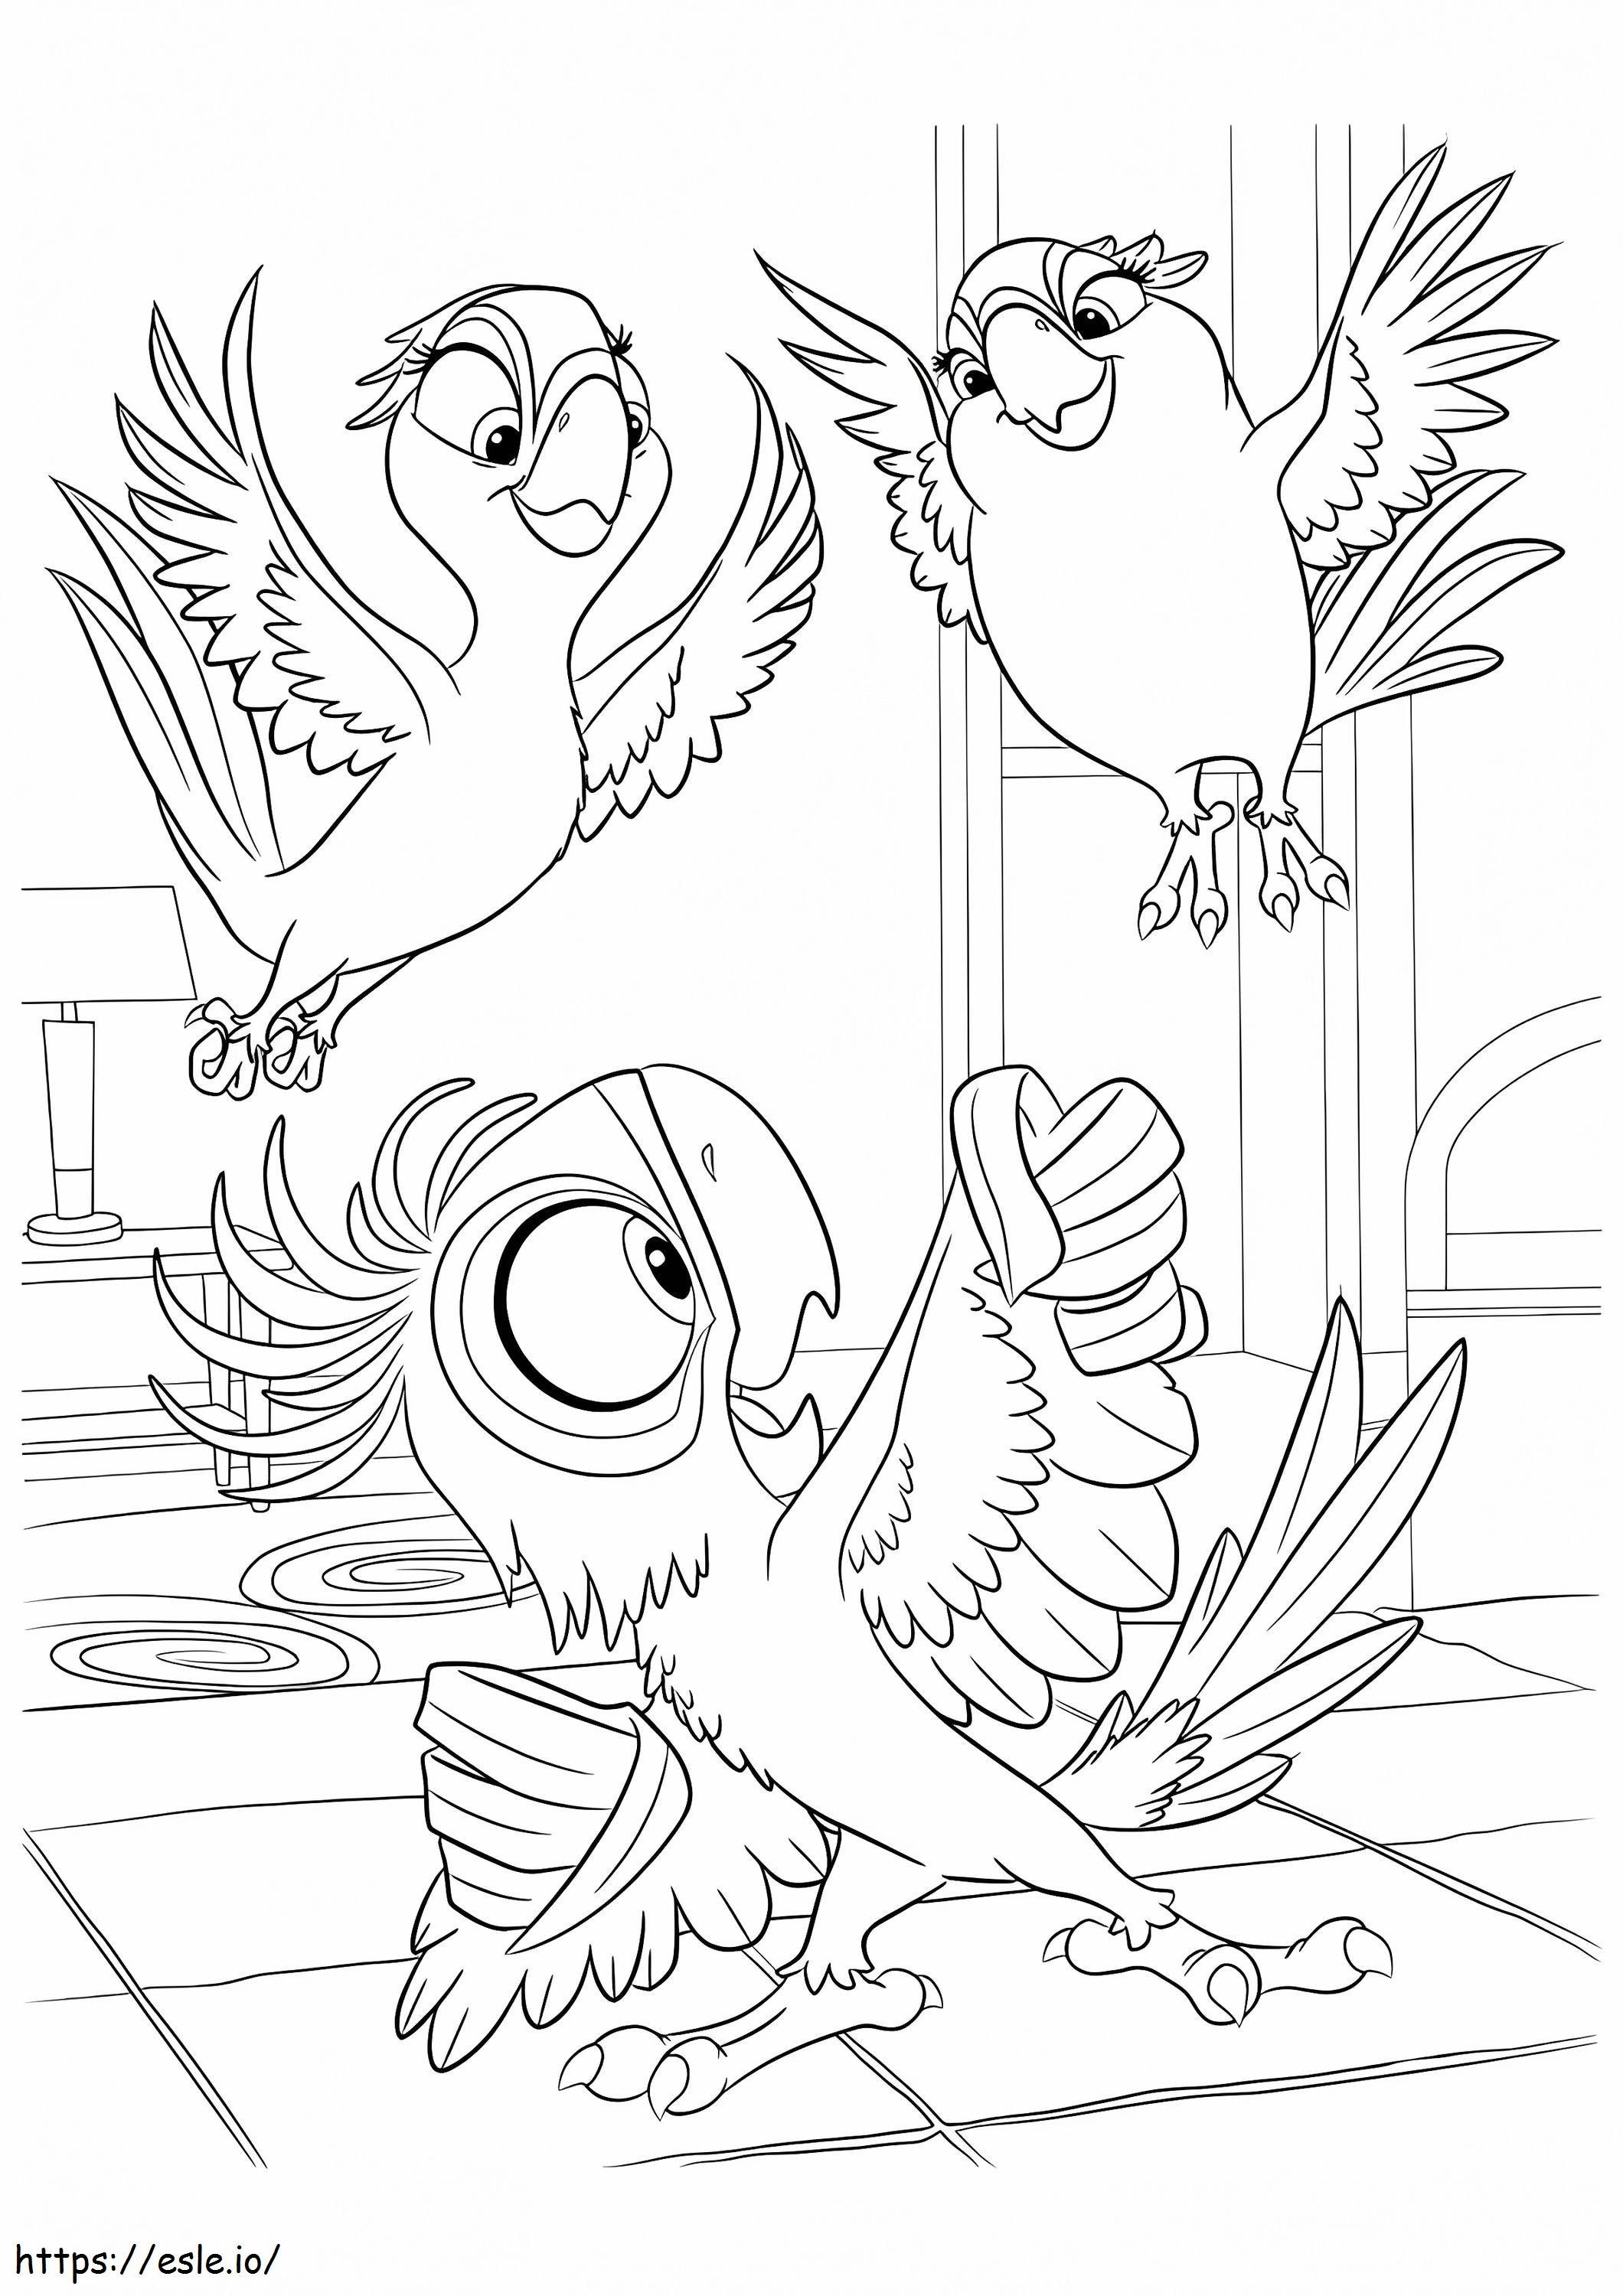 Bia With Carla And Tiago A4 coloring page